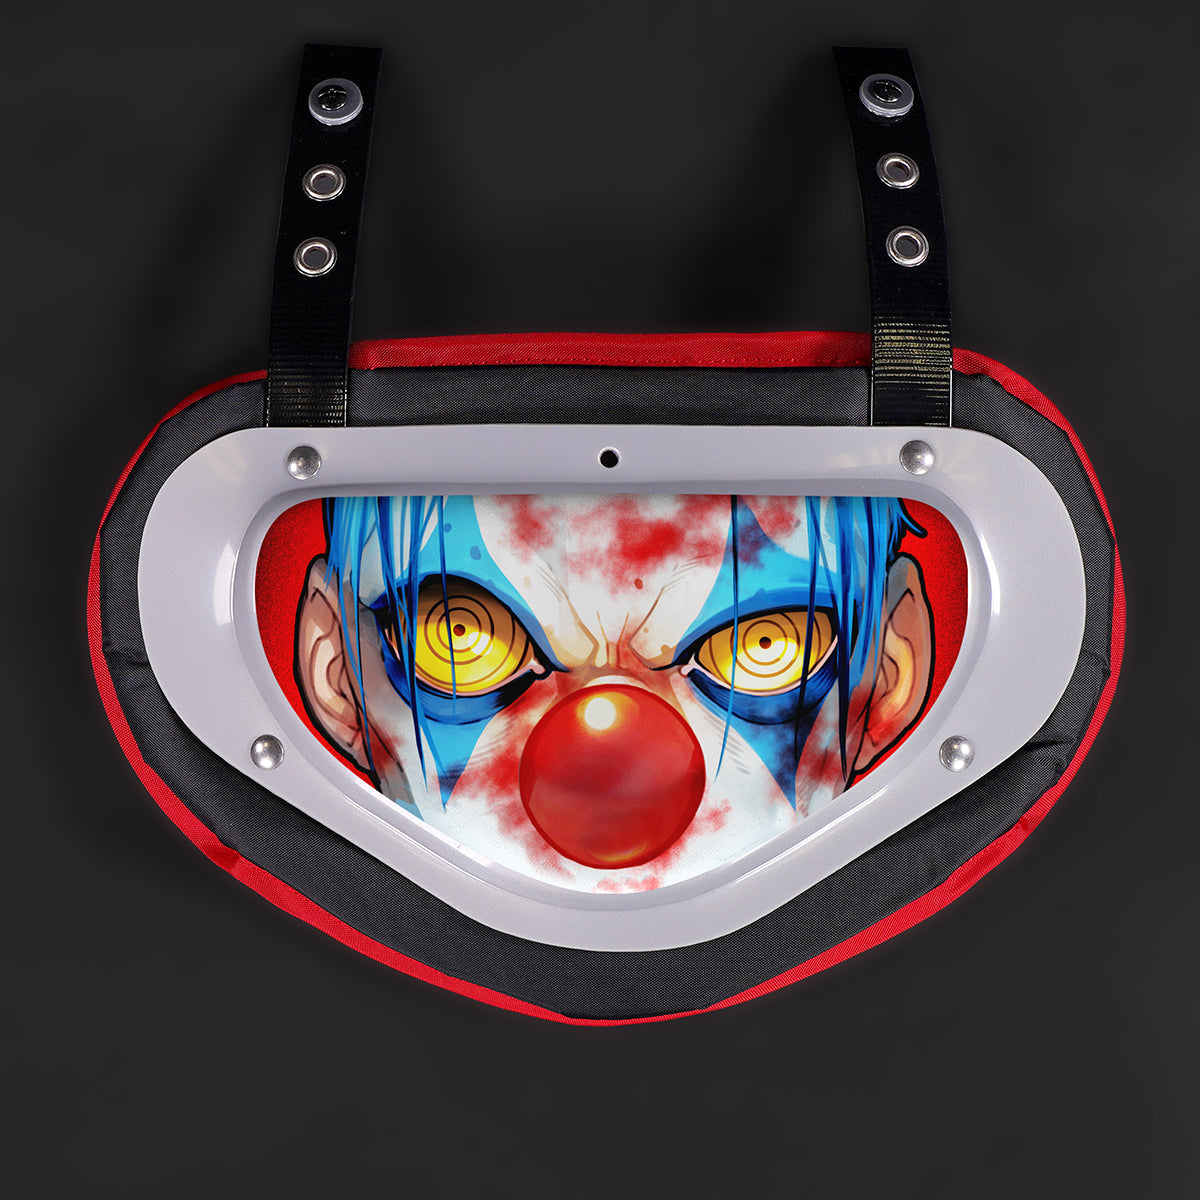 Jester the Clown Sticker for Back Plate